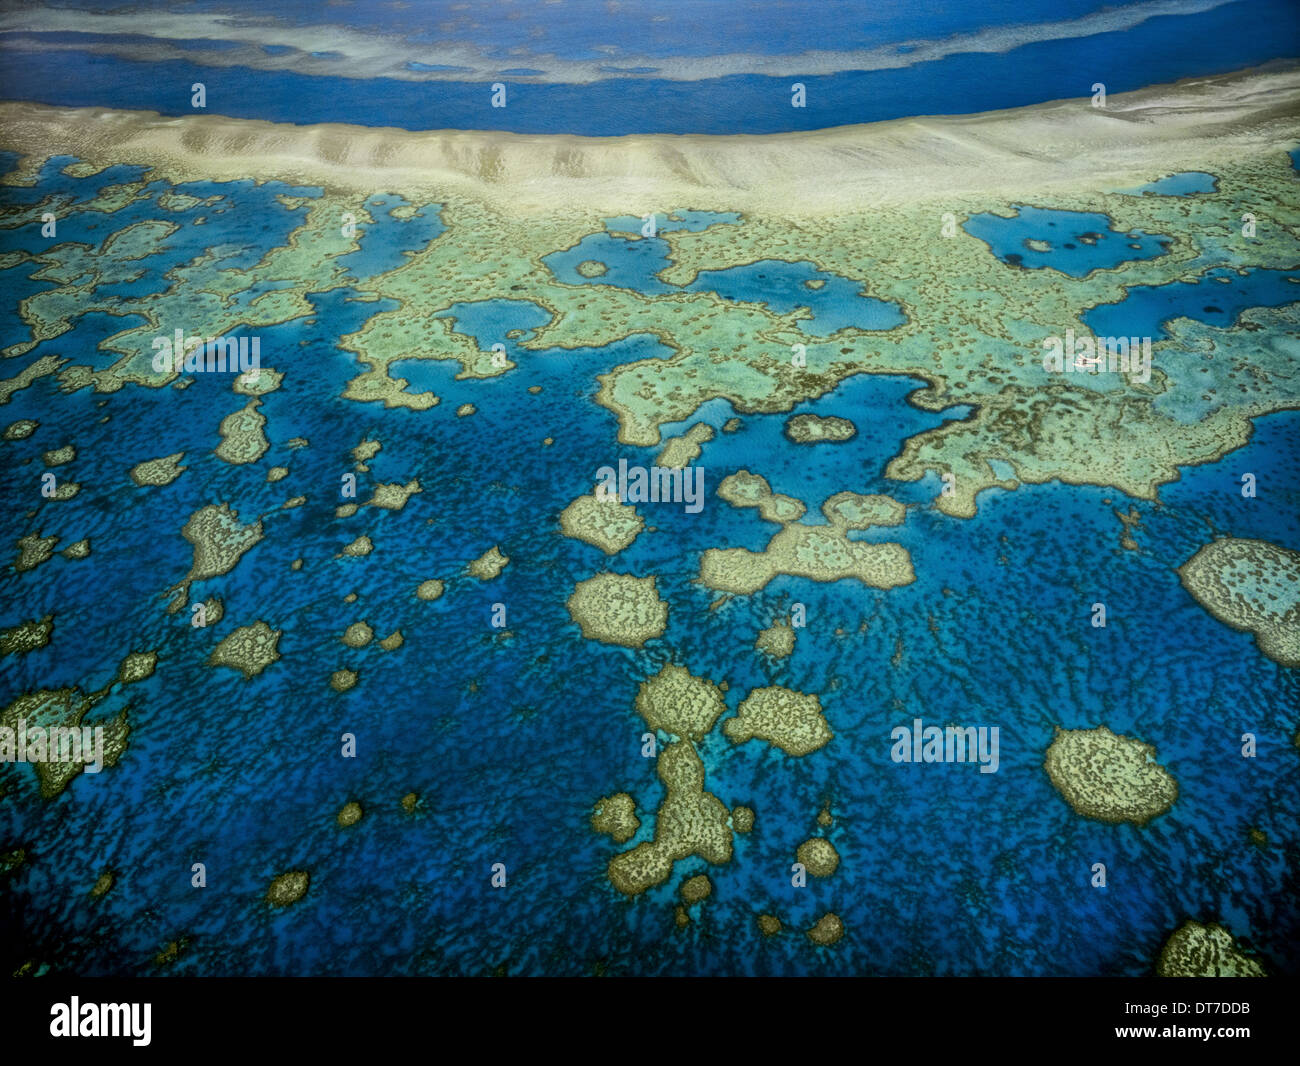 An aerial view of the islands of the Great Barrier Reef in Queensland Australia Great Barrier Reef Queensland Australia Stock Photo